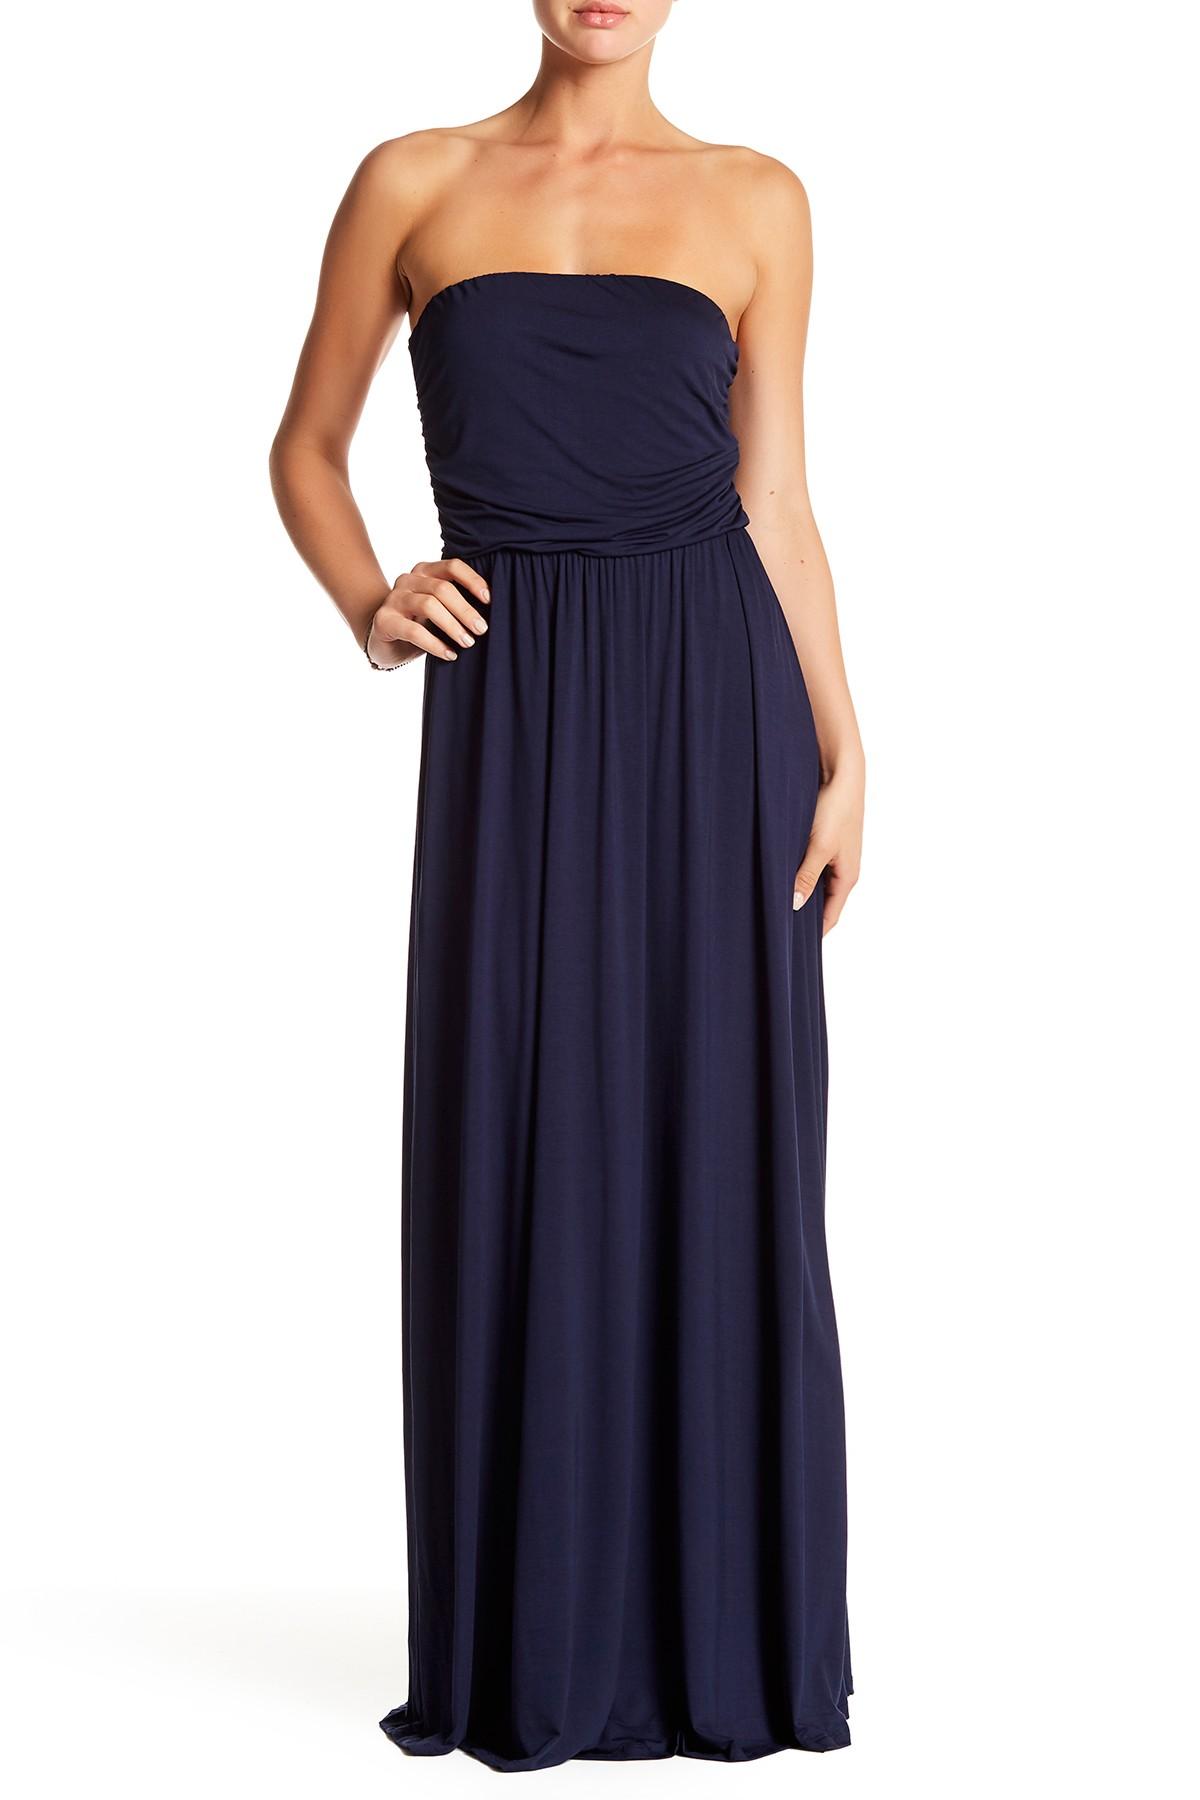 West Kei Synthetic Strapless Knit Maxi Dress in Blue - Lyst